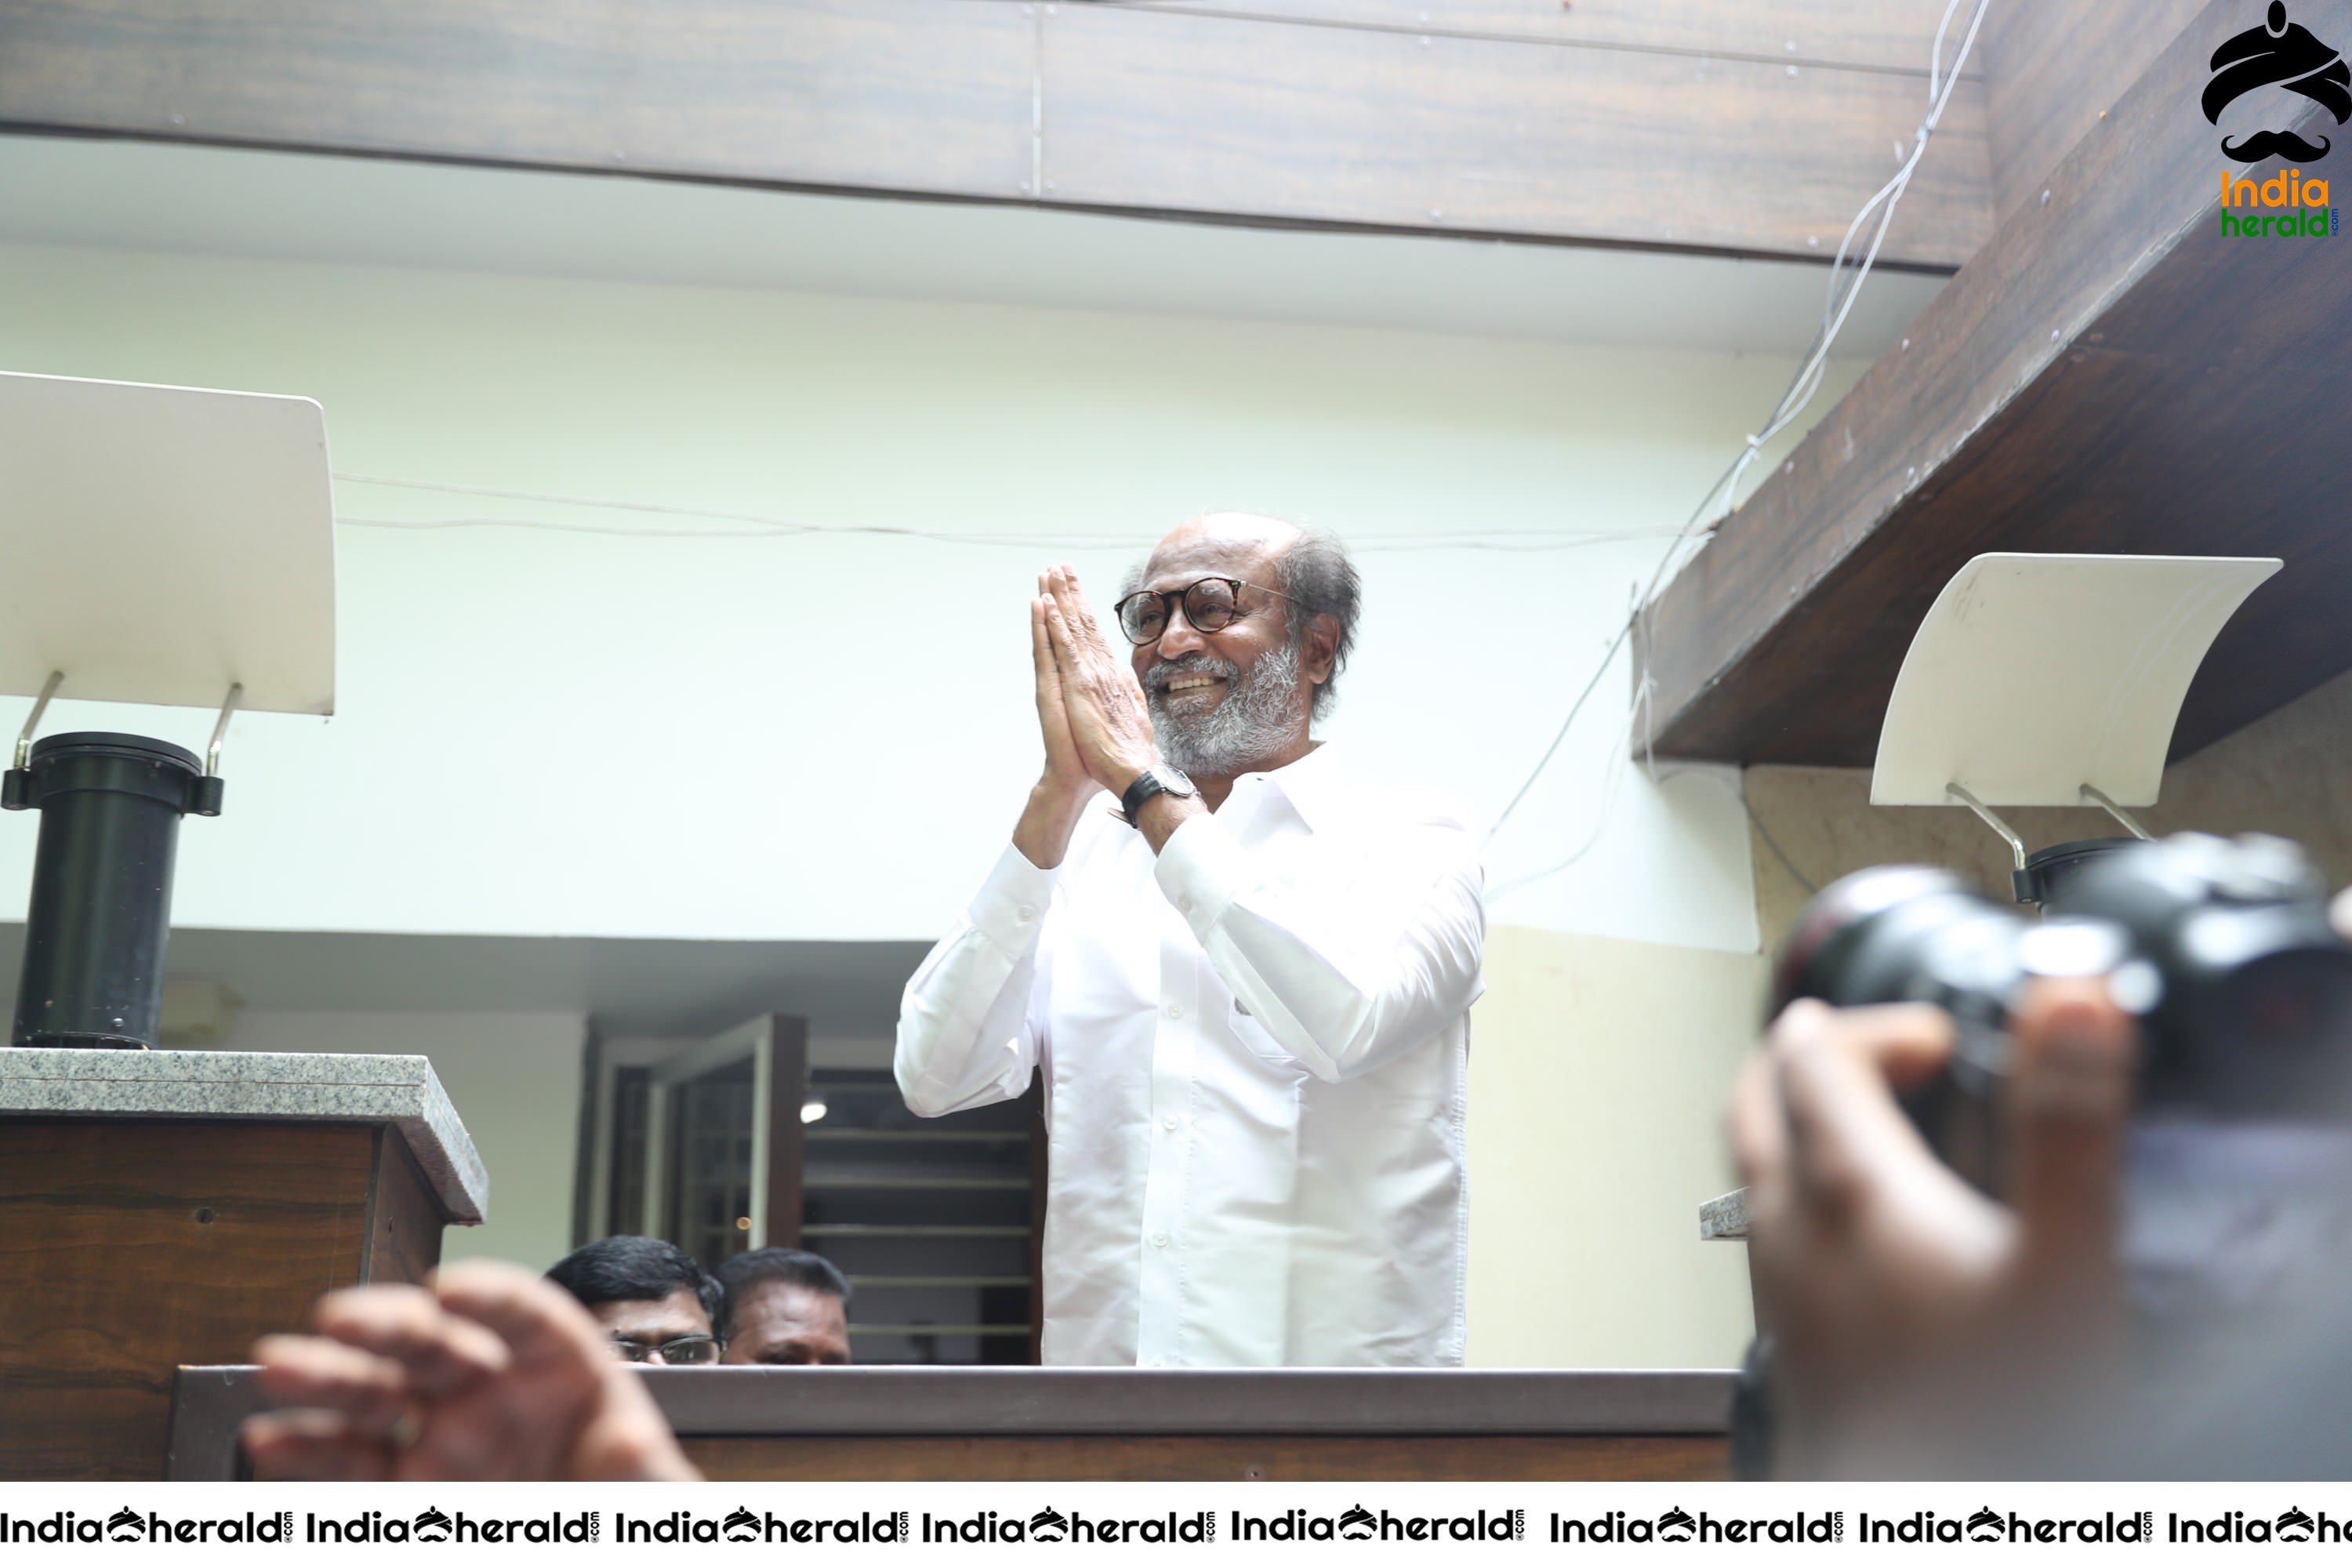 Super Star Rajinikanth Meets the Fans and Media Outside His Residence